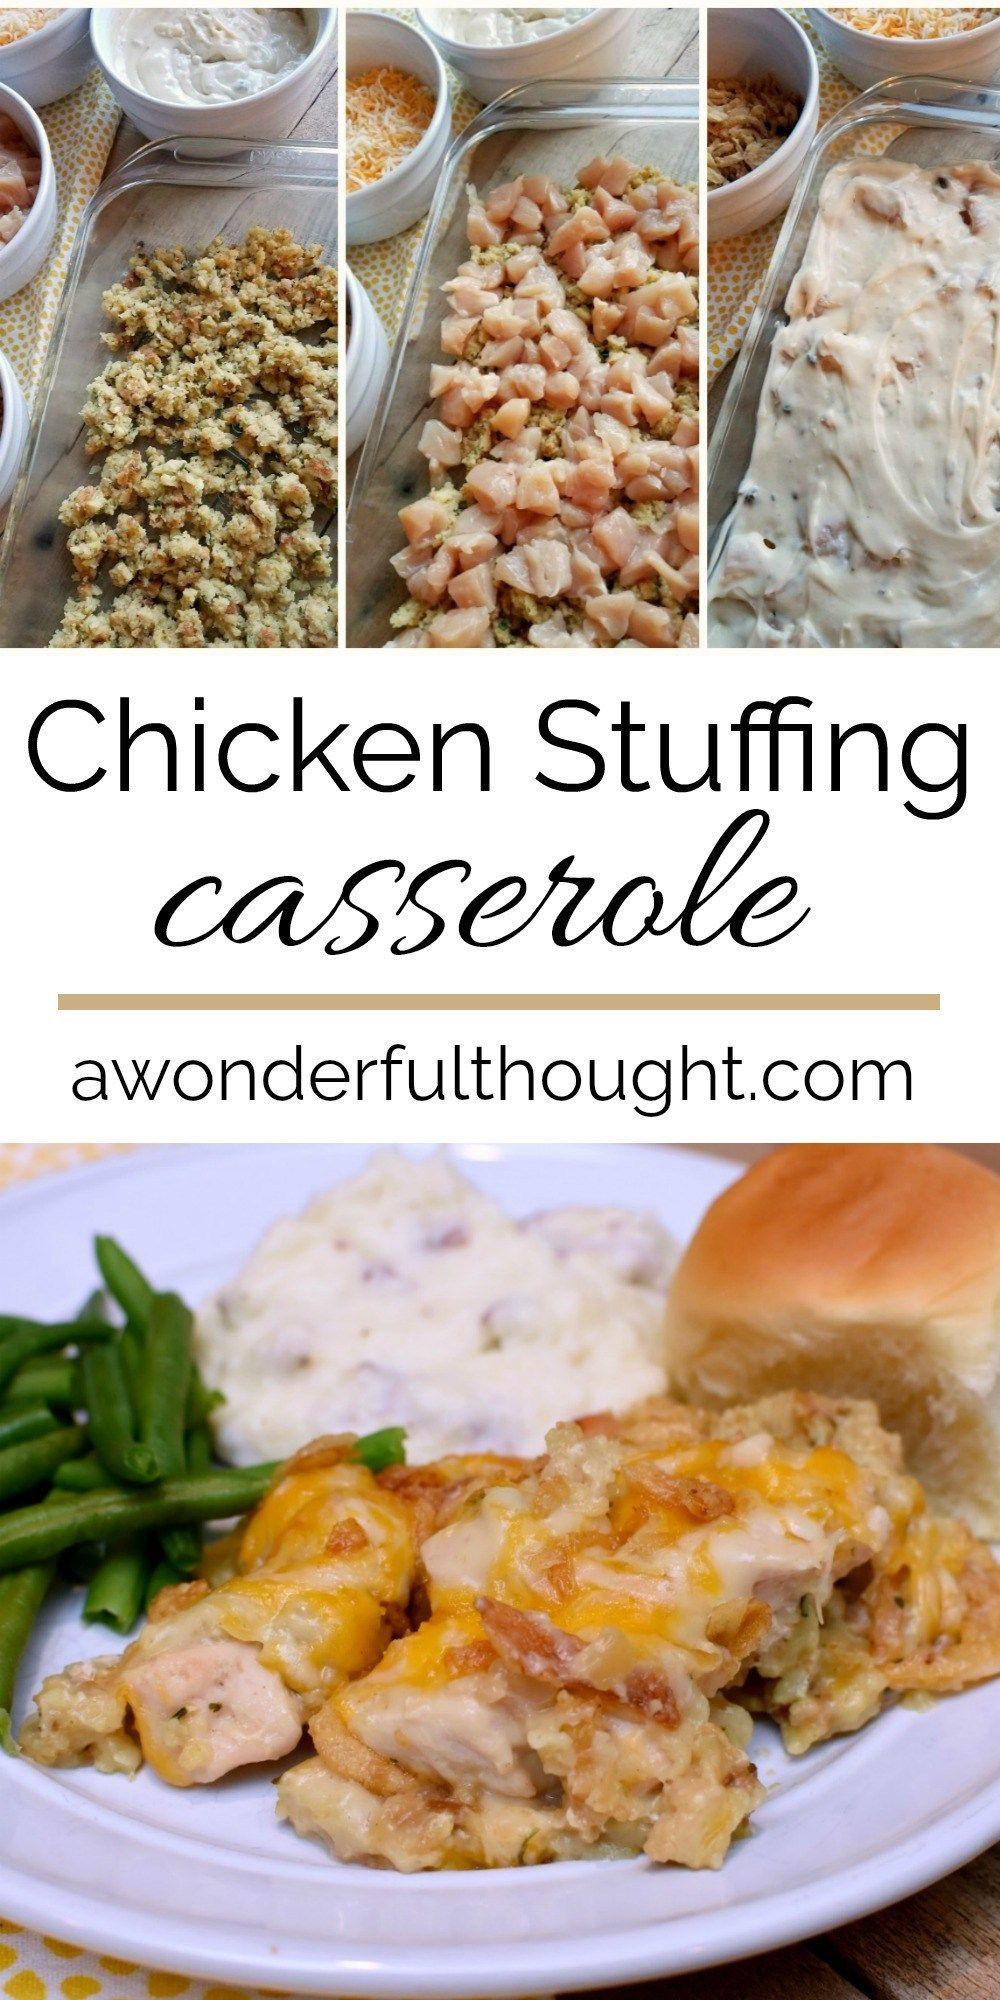 Chicken And Stuffing Bake Without Soup
 Chicken Stuffing Casserole Recipe